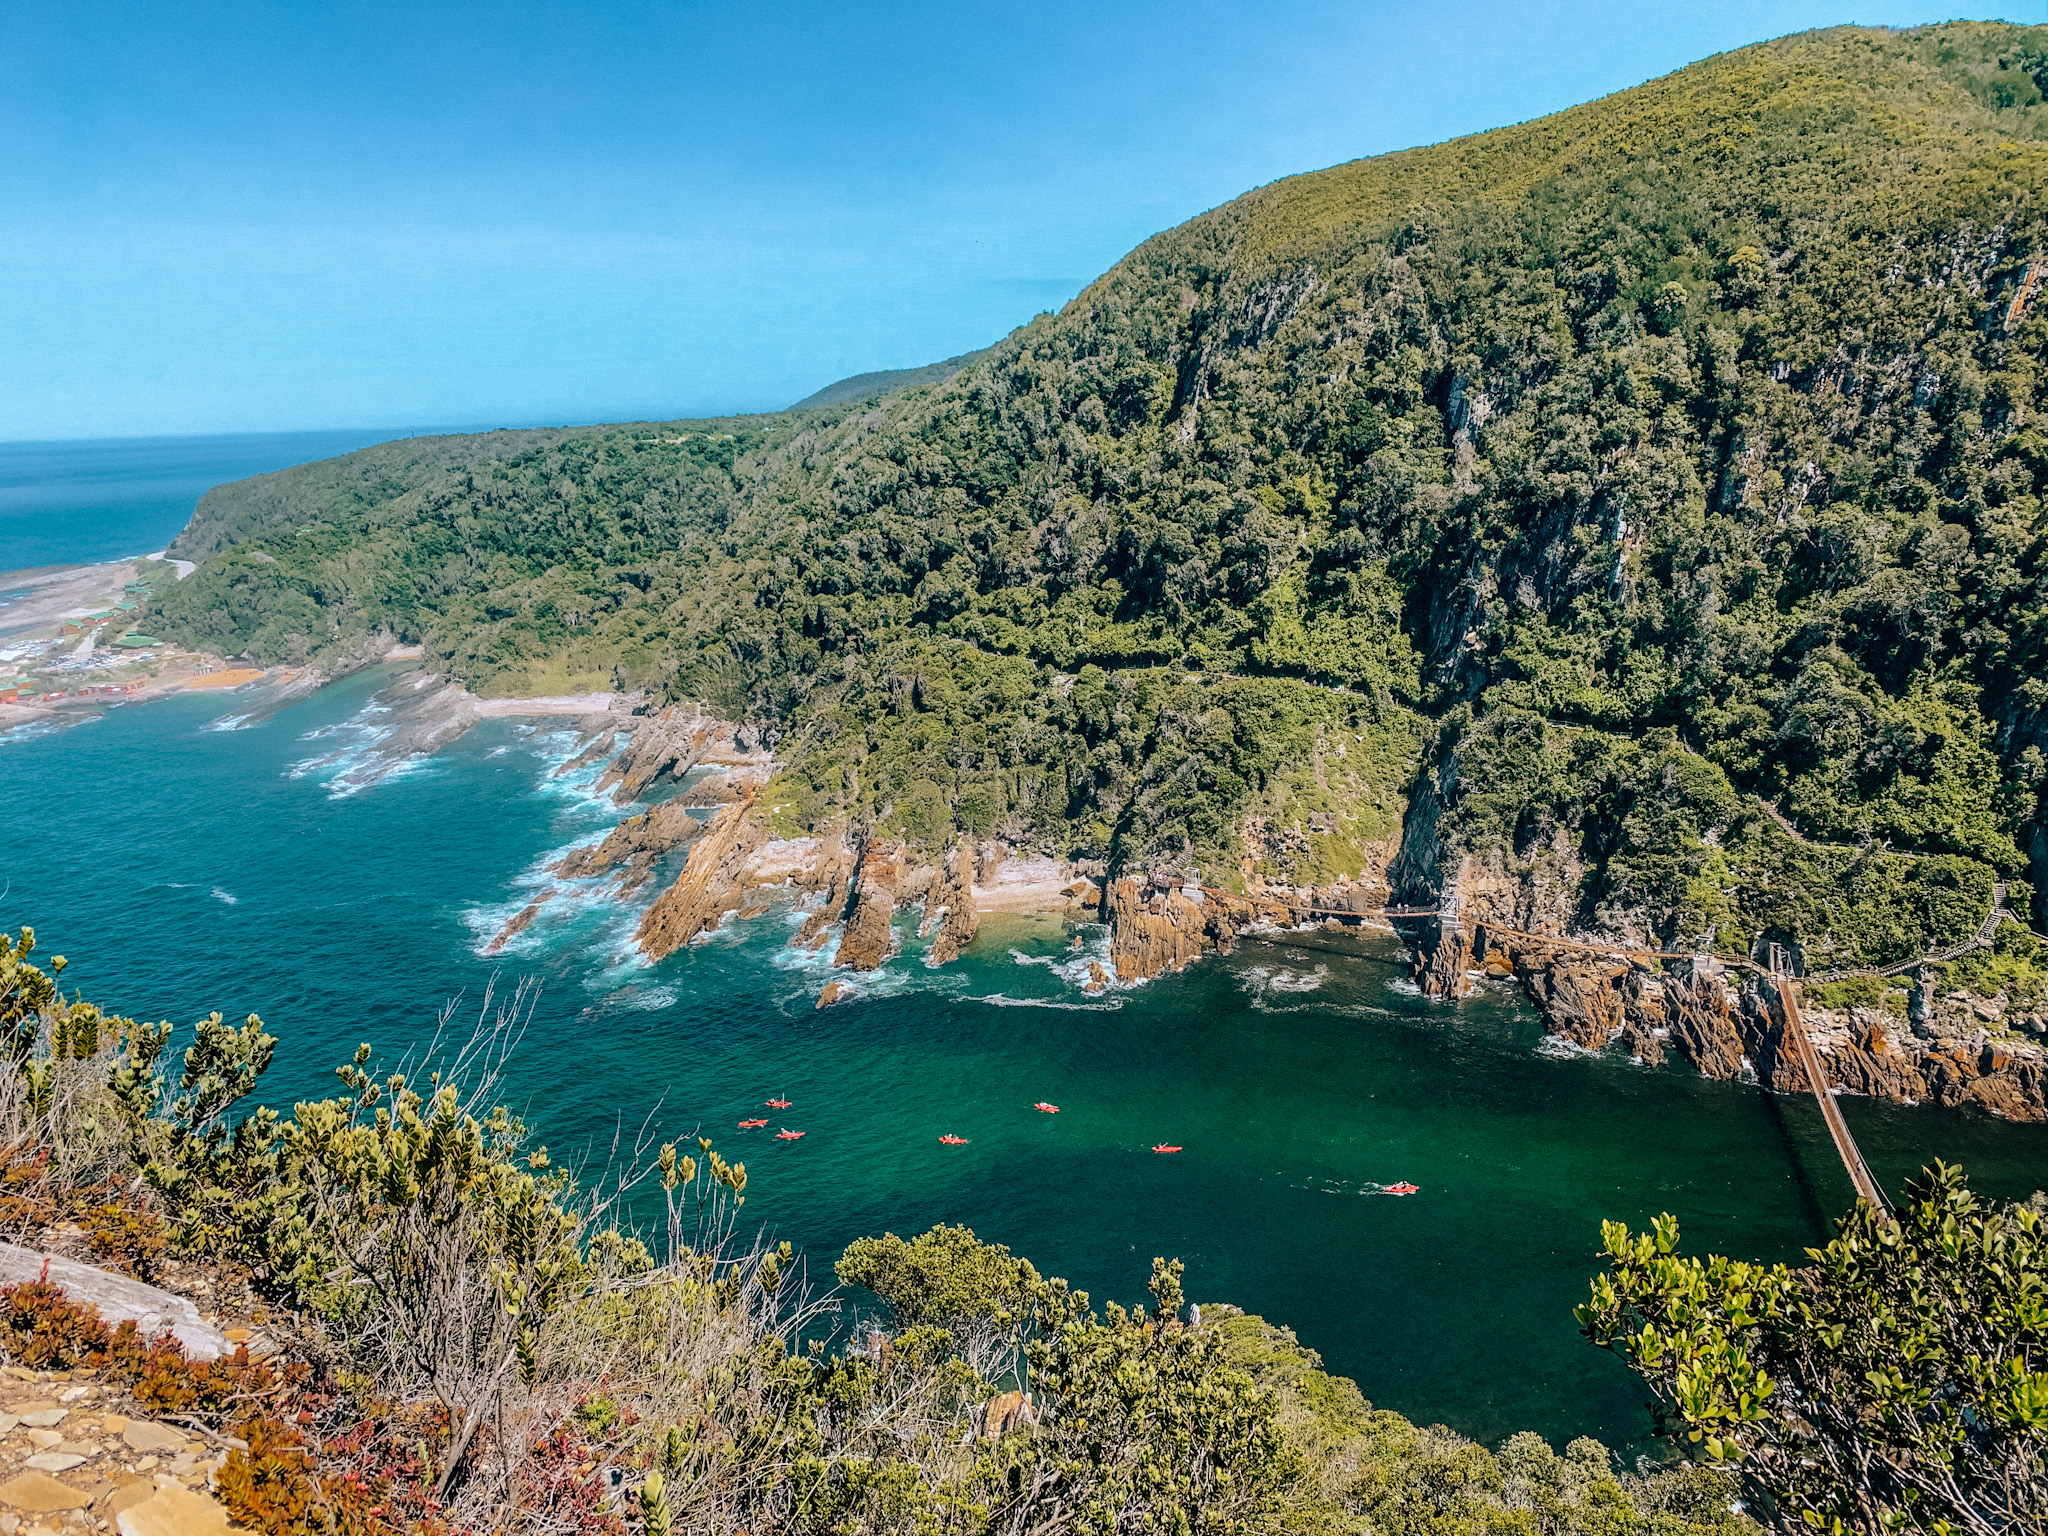 Storms River Mouth in Tsitsikamma National Park. Photo: Kellie Paxian